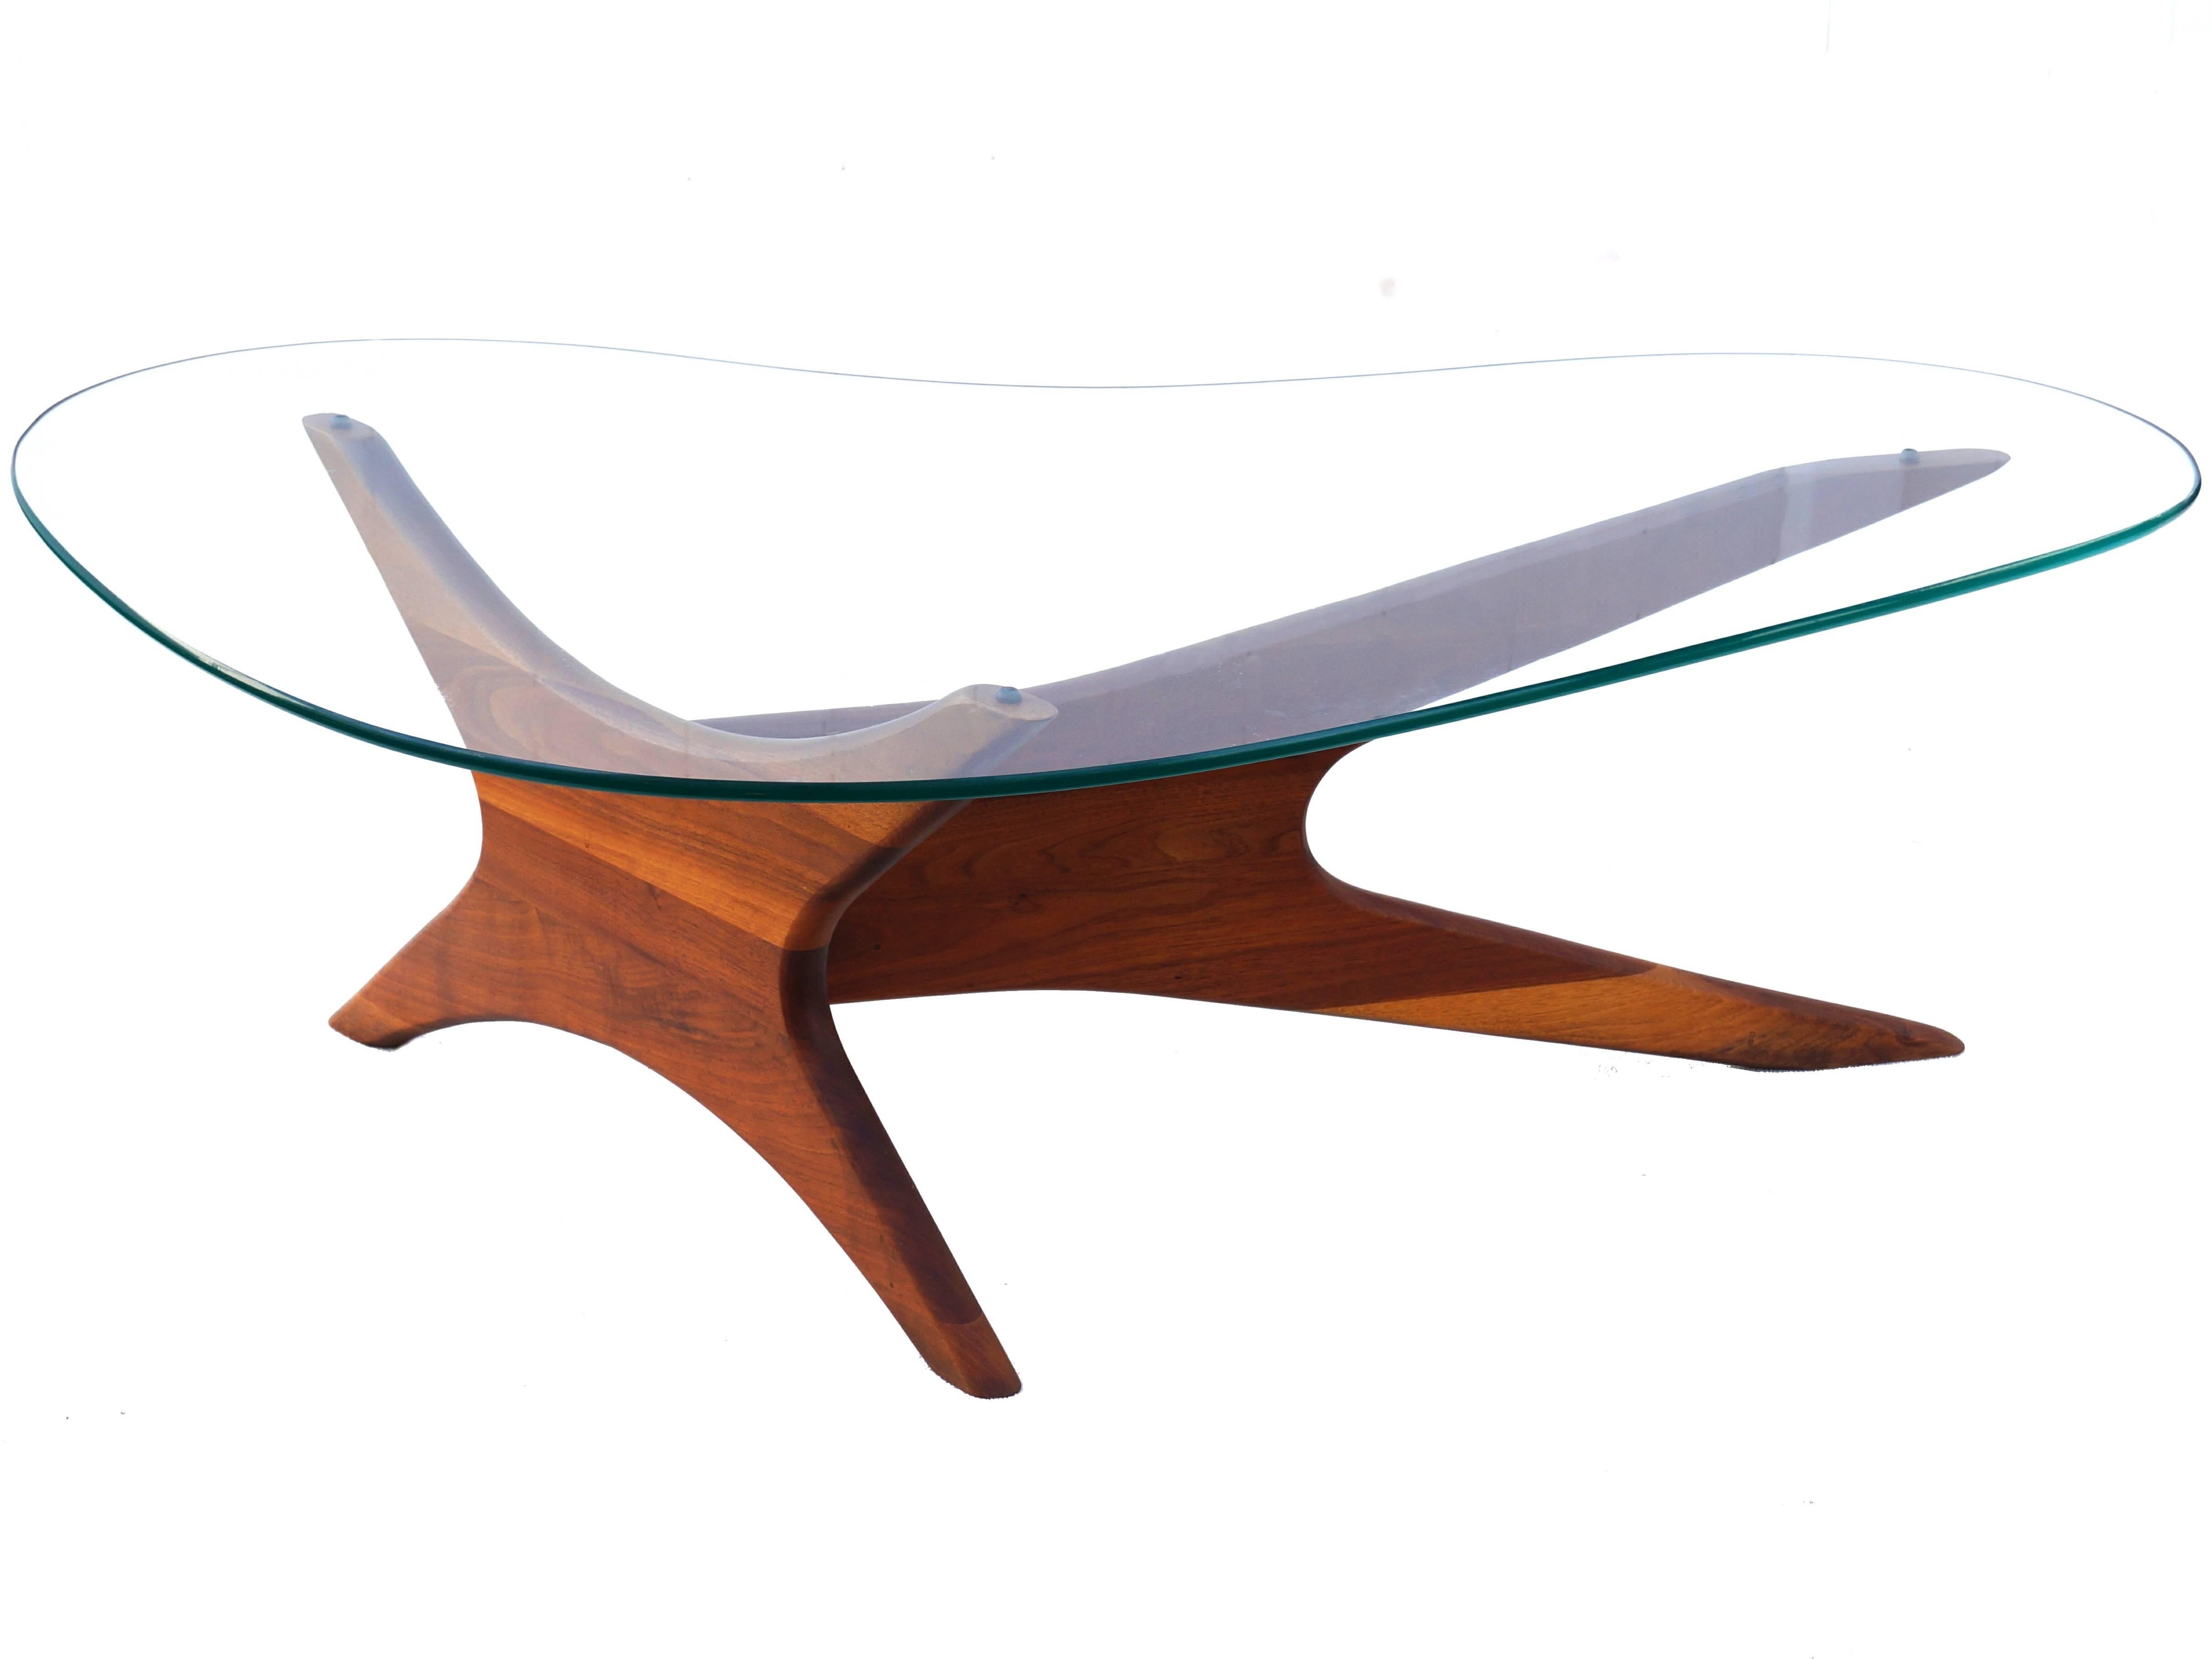 Adrian Pearsall Biomorphic Kidney Shaped Glass Coffee Table, Mid-Century Modern 1